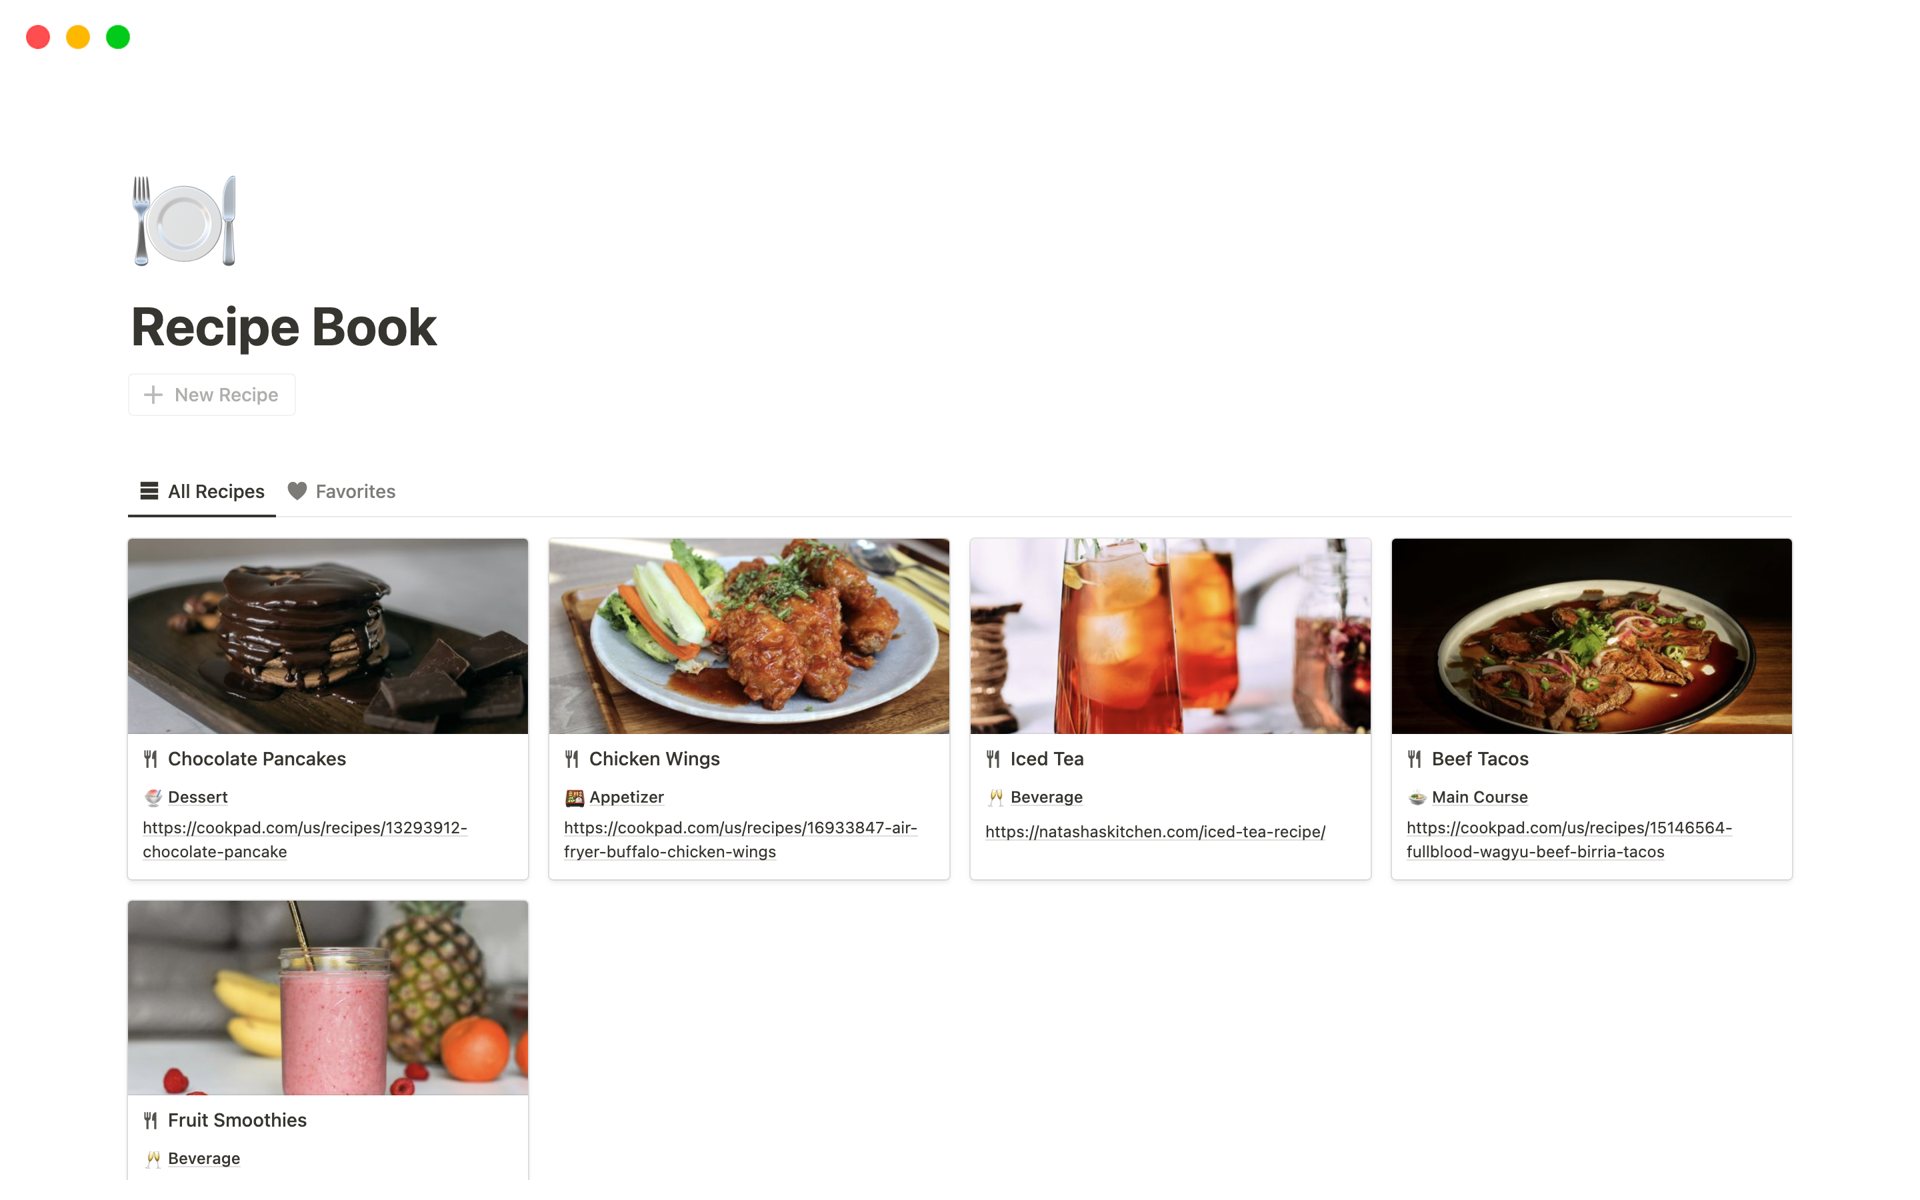 The Recipe Book Notion template is a comprehensive solution for organizing your recipes, allowing you to store, manage, and categorize recipes in one place.